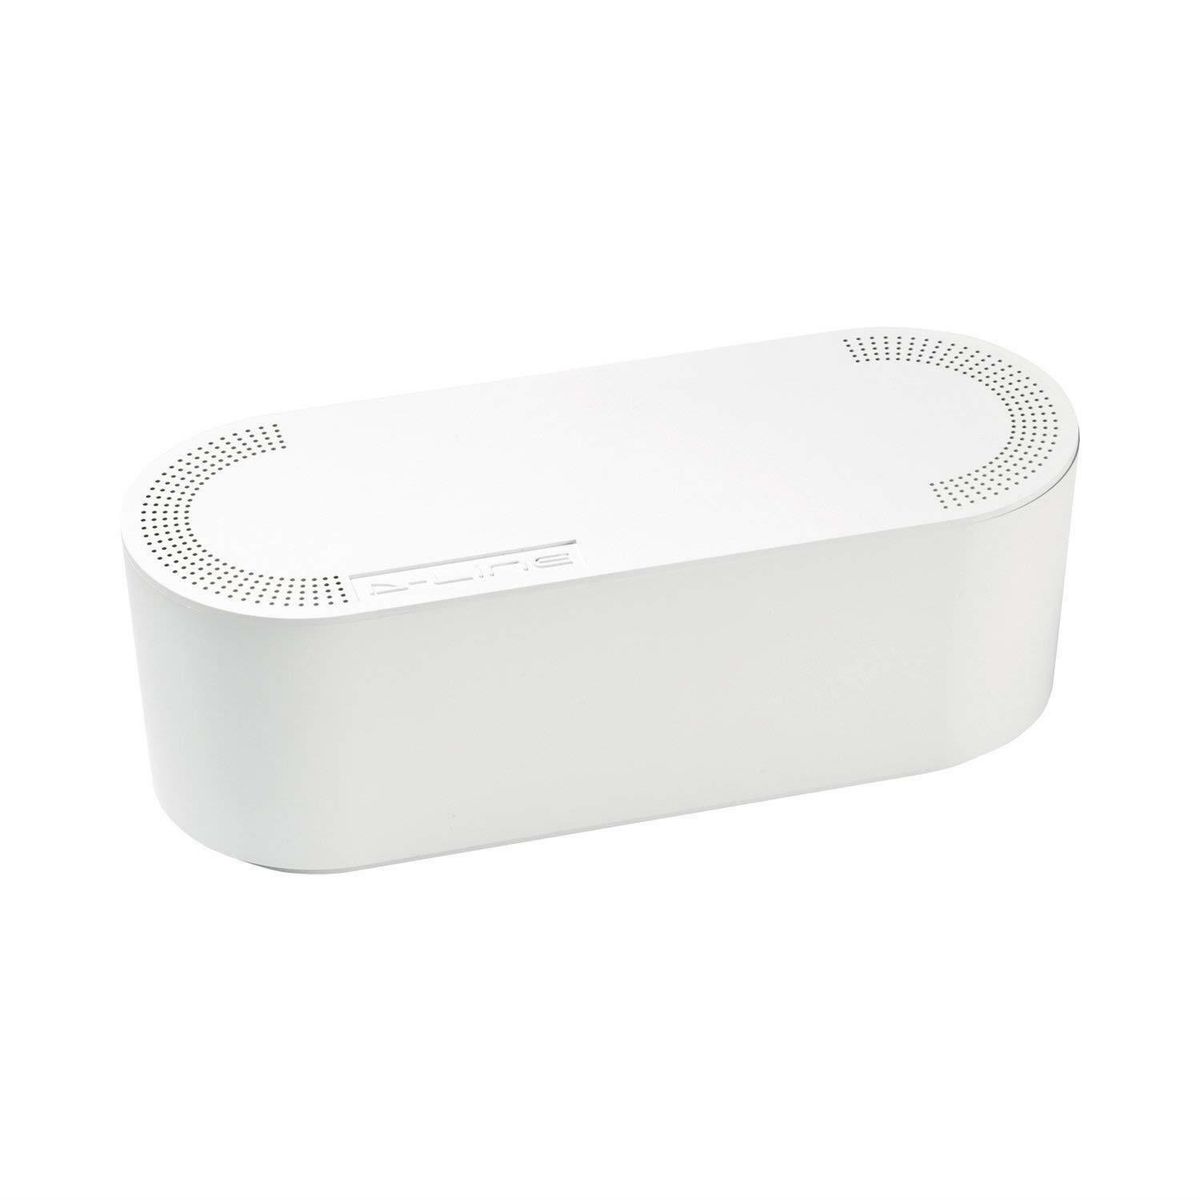 D-Line: Tidy Cable Management Box - SMALL - 325mm x 125mm x 115m, White